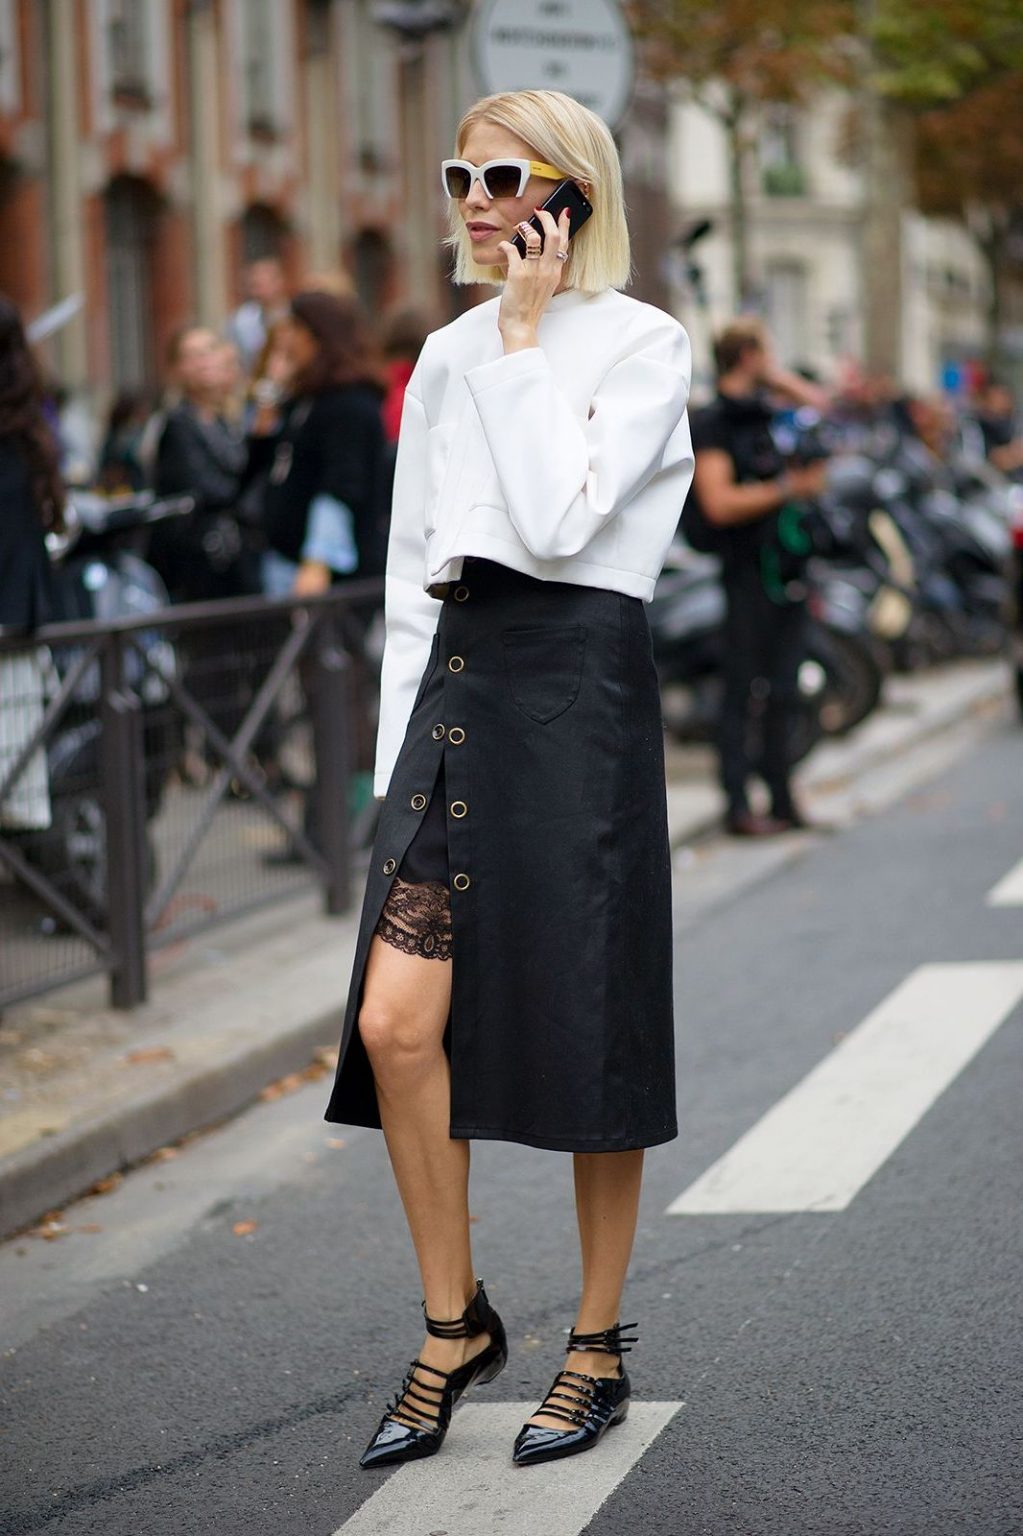 What Tops To Wear With Black Skirts To Stand Out 2023 | Fashion Canons